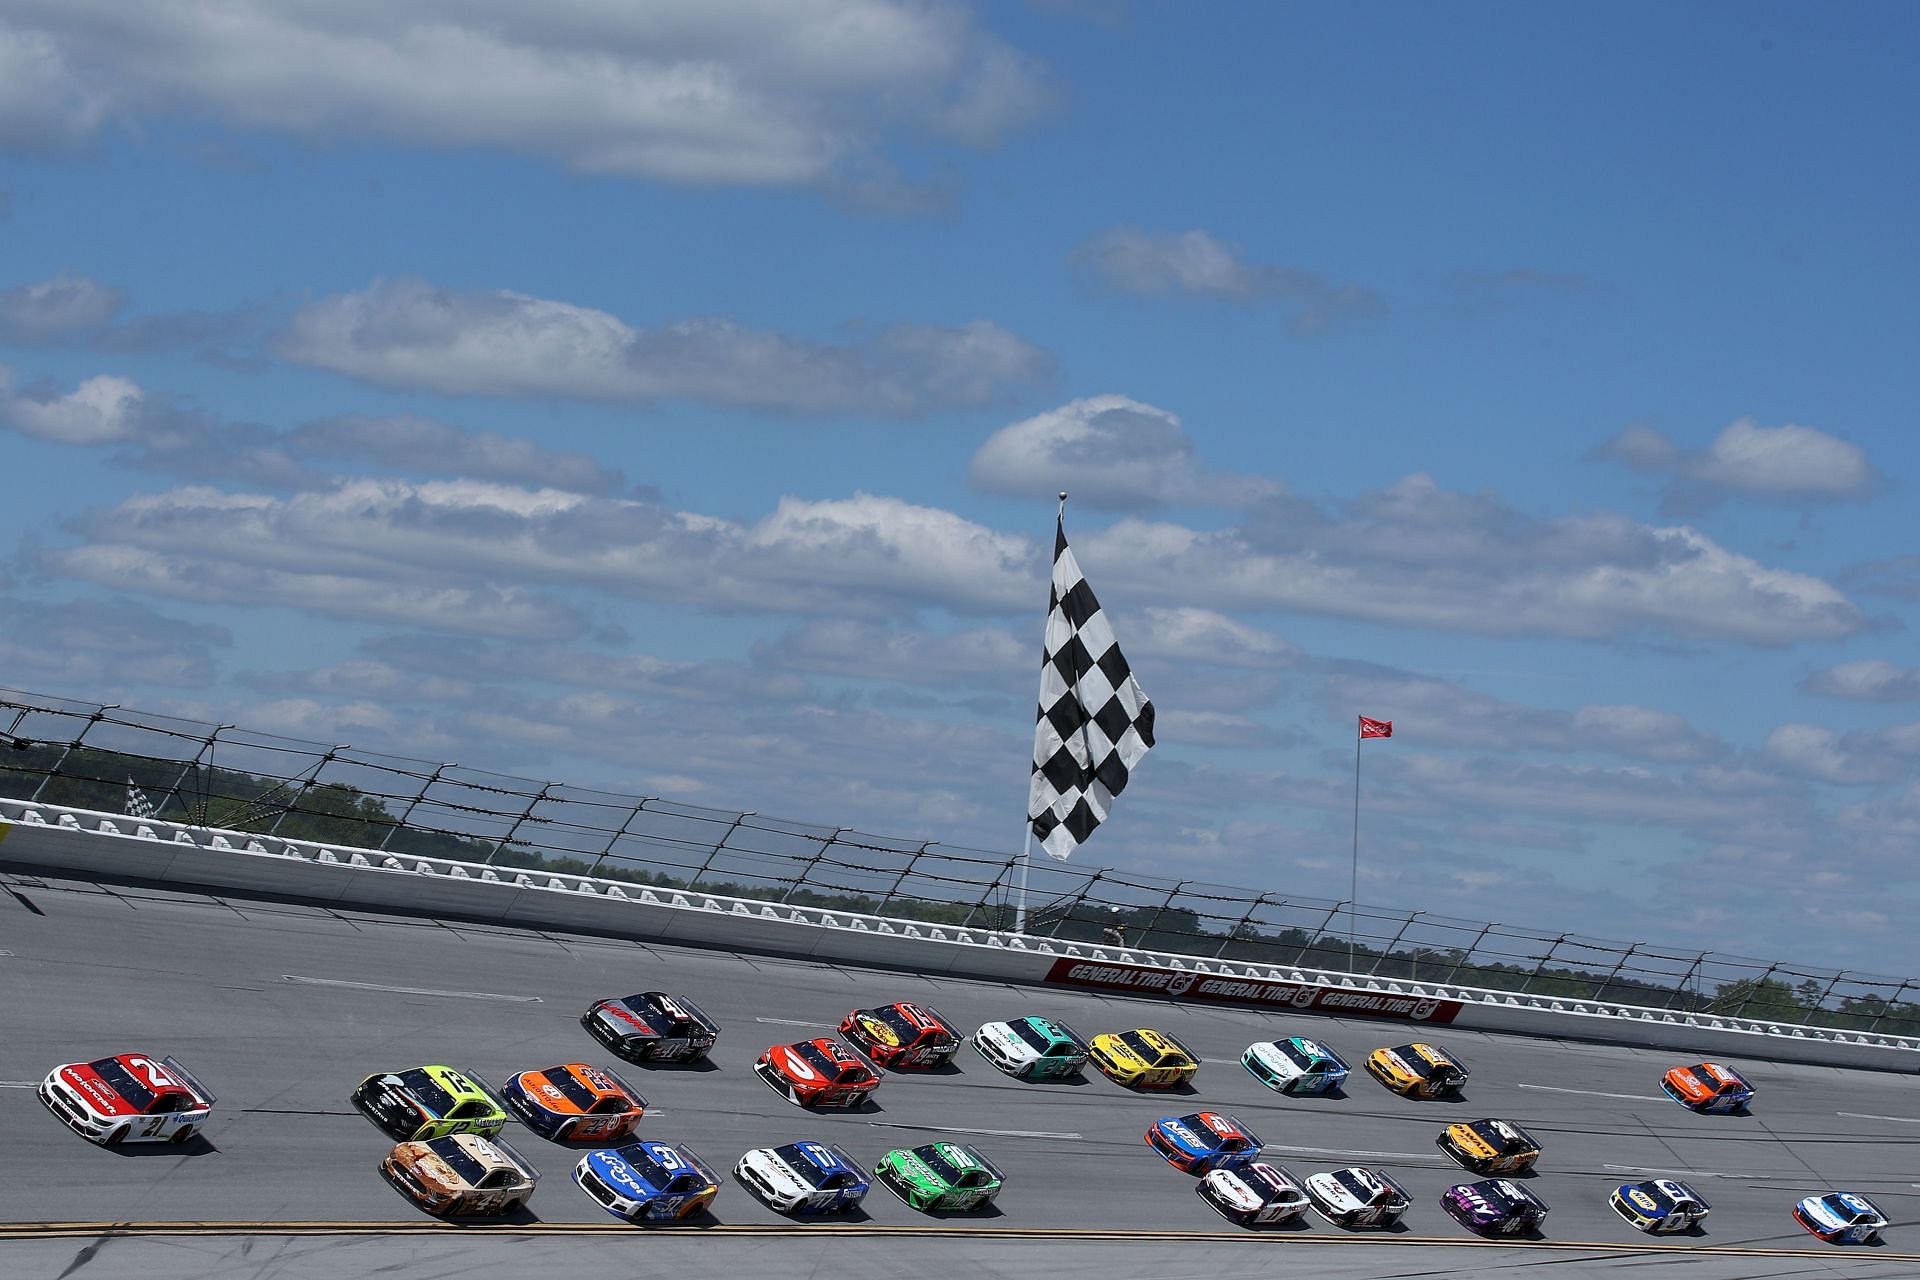 Matt DiBenedetto leads the field during the NASCAR Cup Series GEICO 500 at Talladega Superspeedway (Photo by Sean Gardner/Getty Images)